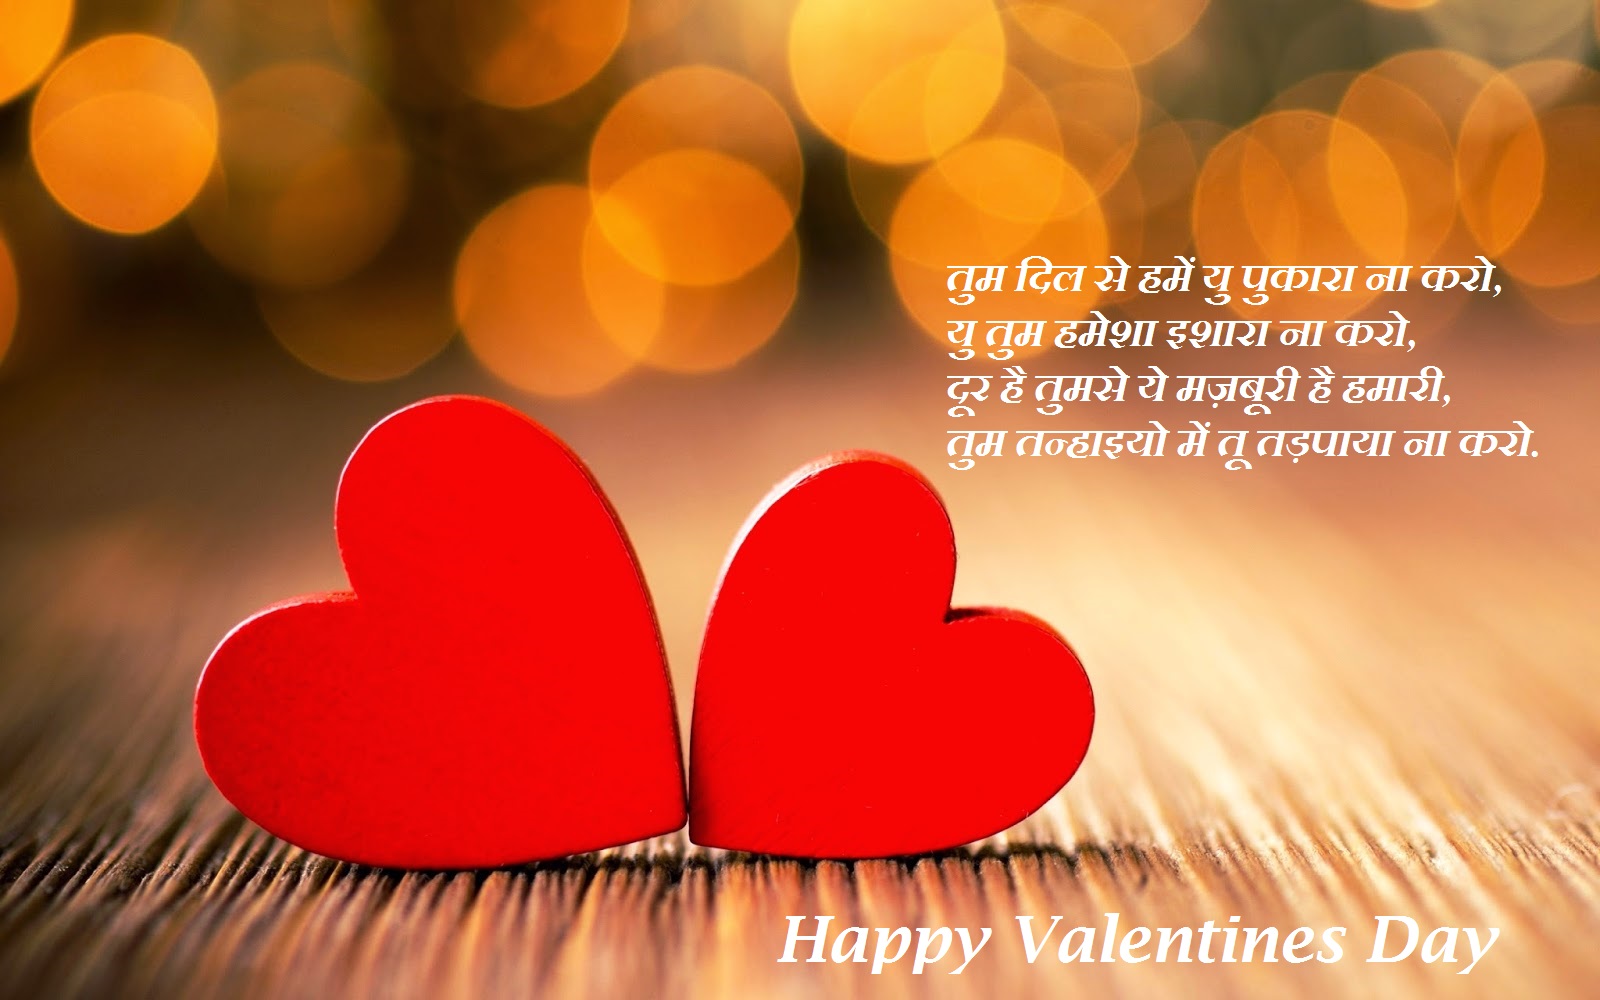 Happy Valentine’s Day Messages, Status and SMS for Husband - Wife - Badhaai.com